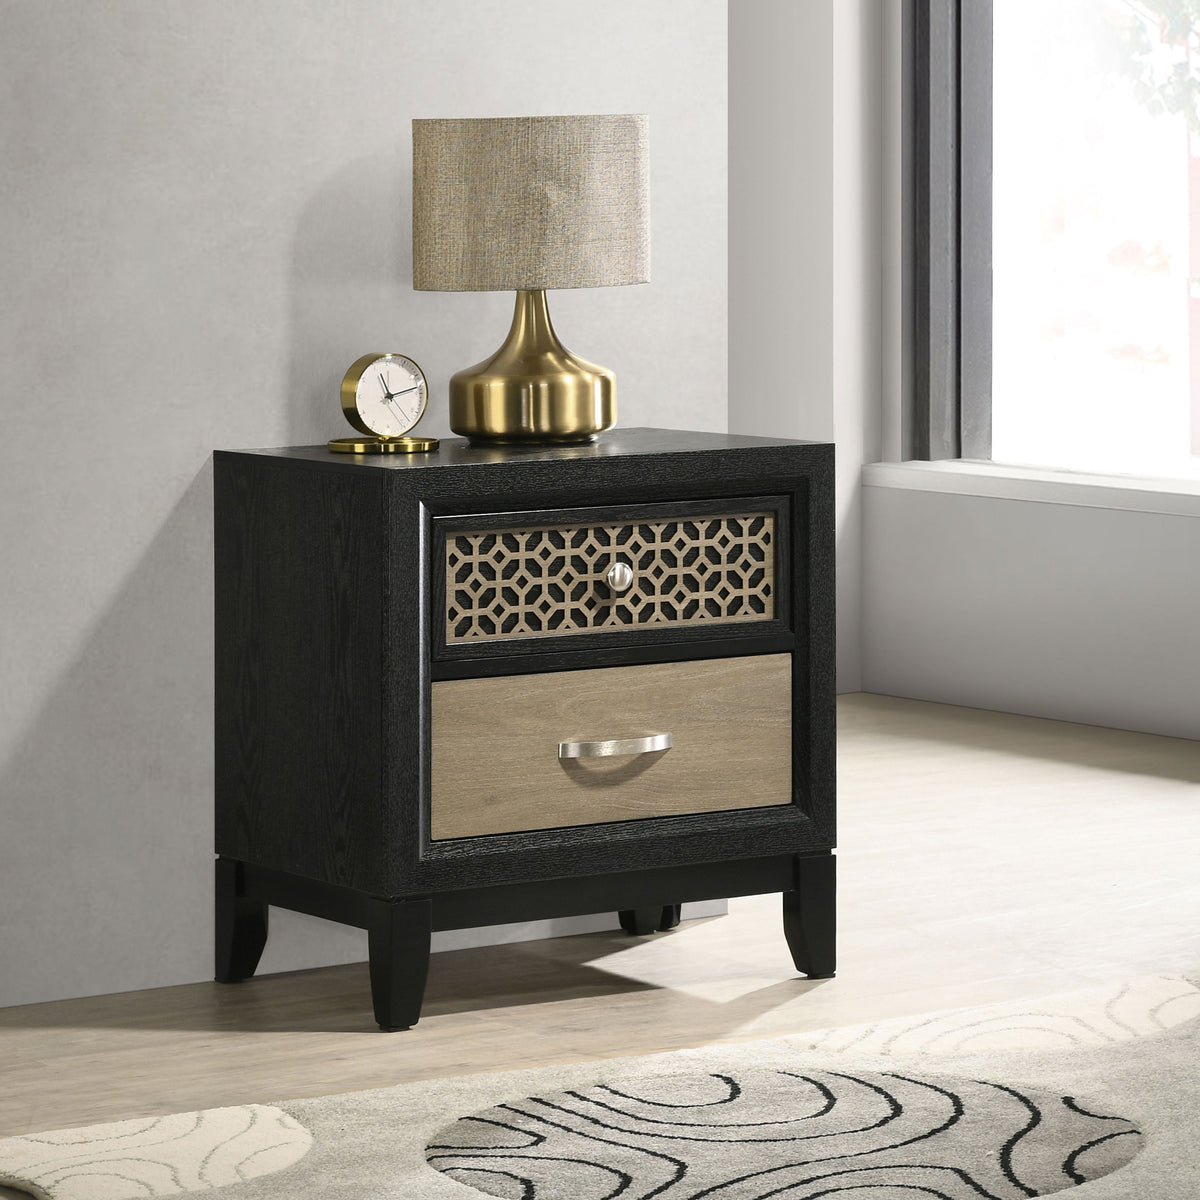 Valencia 2-drawer Nightstand Light Brown and Black Valencia 2-drawer Nightstand Light Brown and Black Half Price Furniture